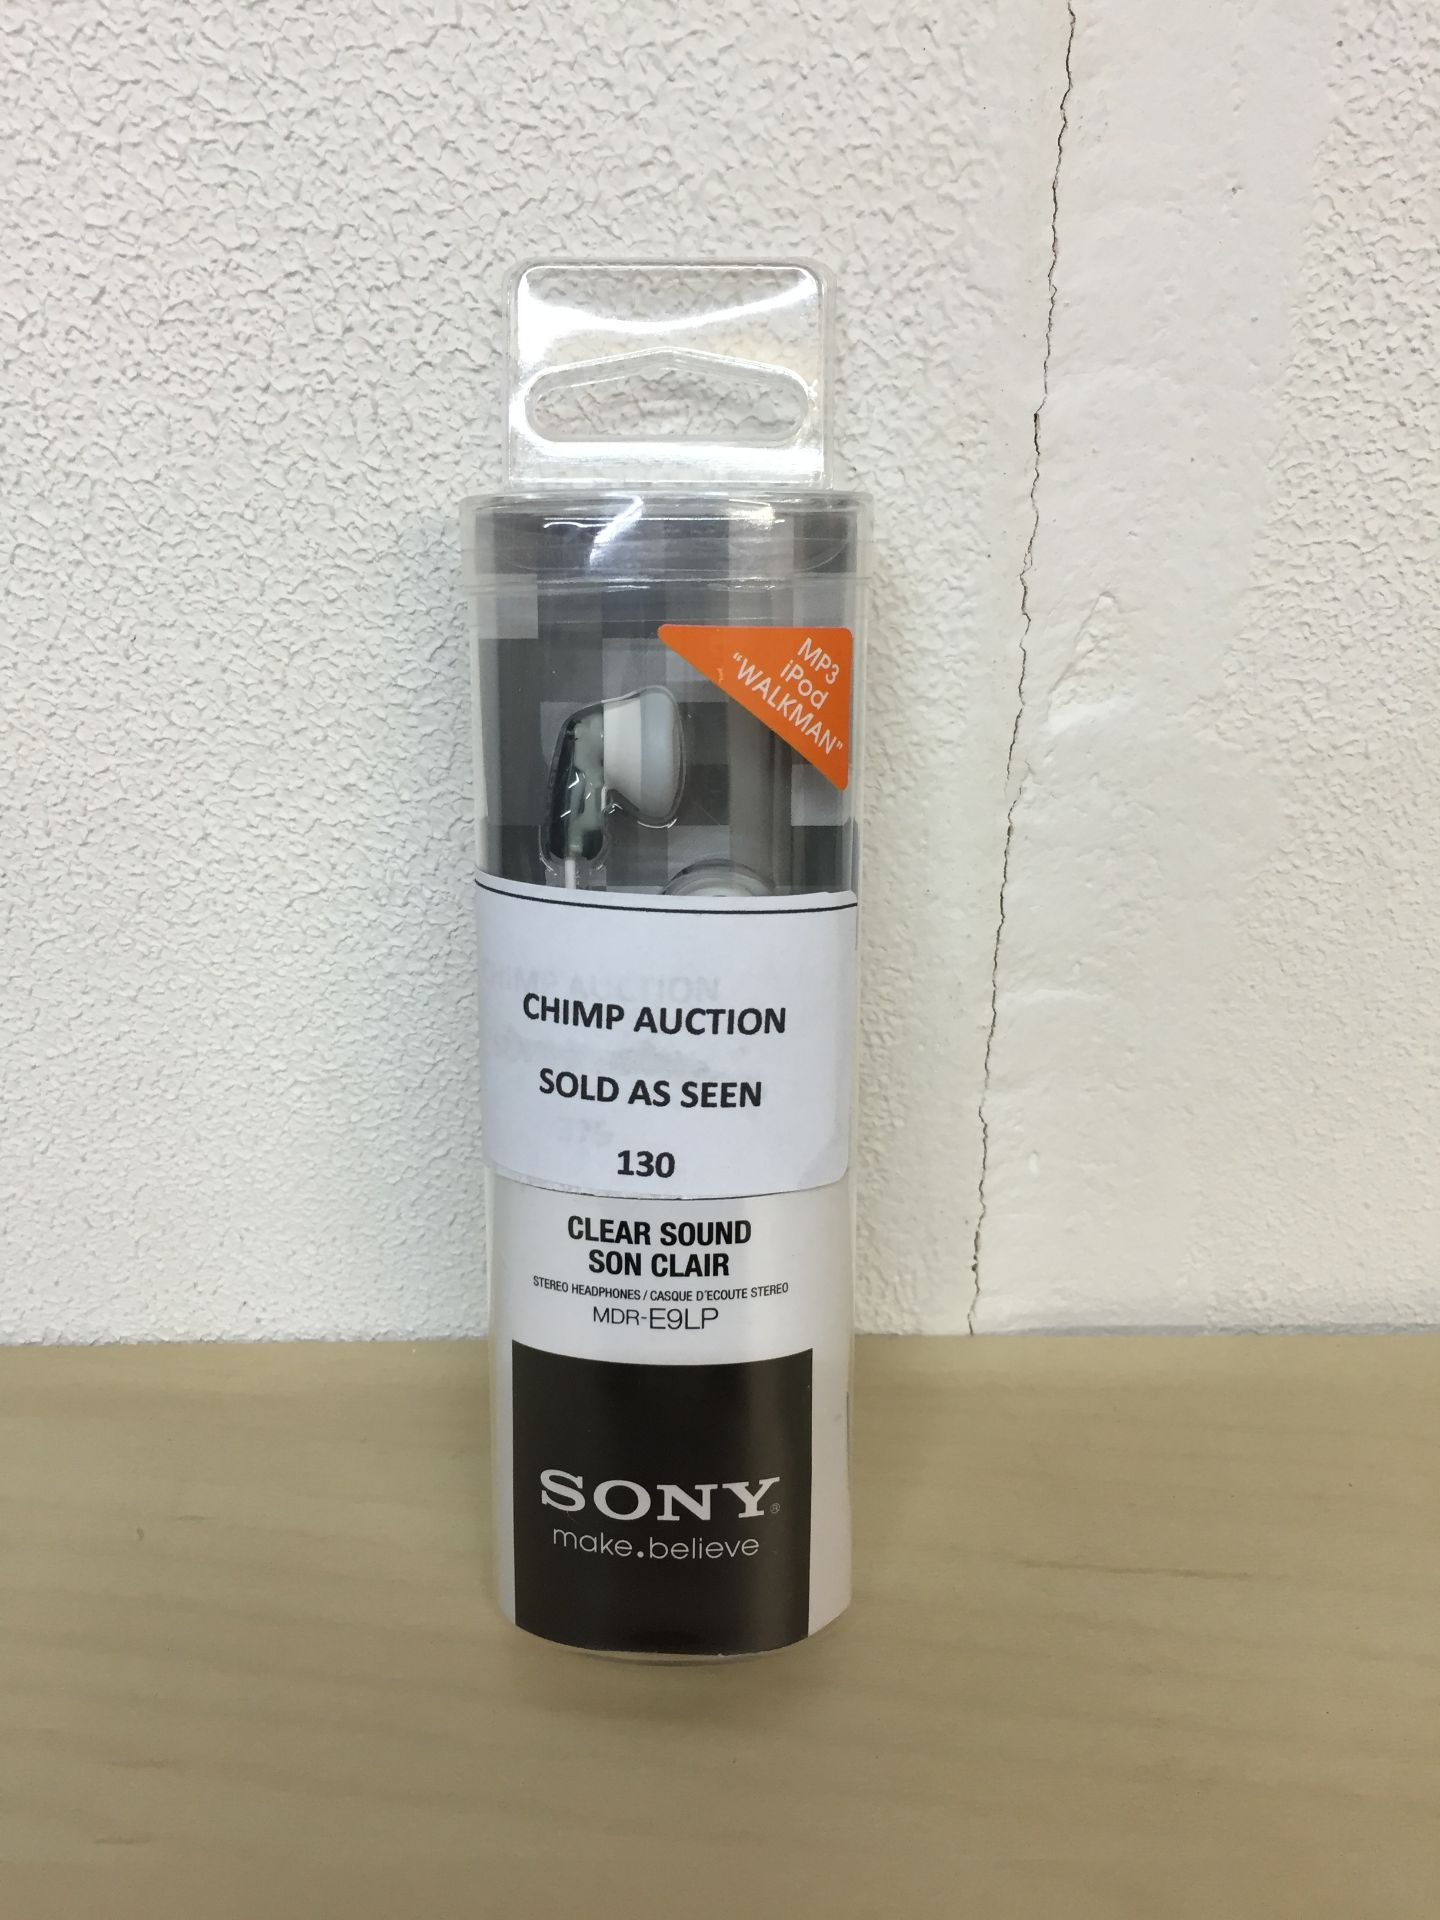 NEW & SEALED SONY MDR-E9LP HEADPHONES